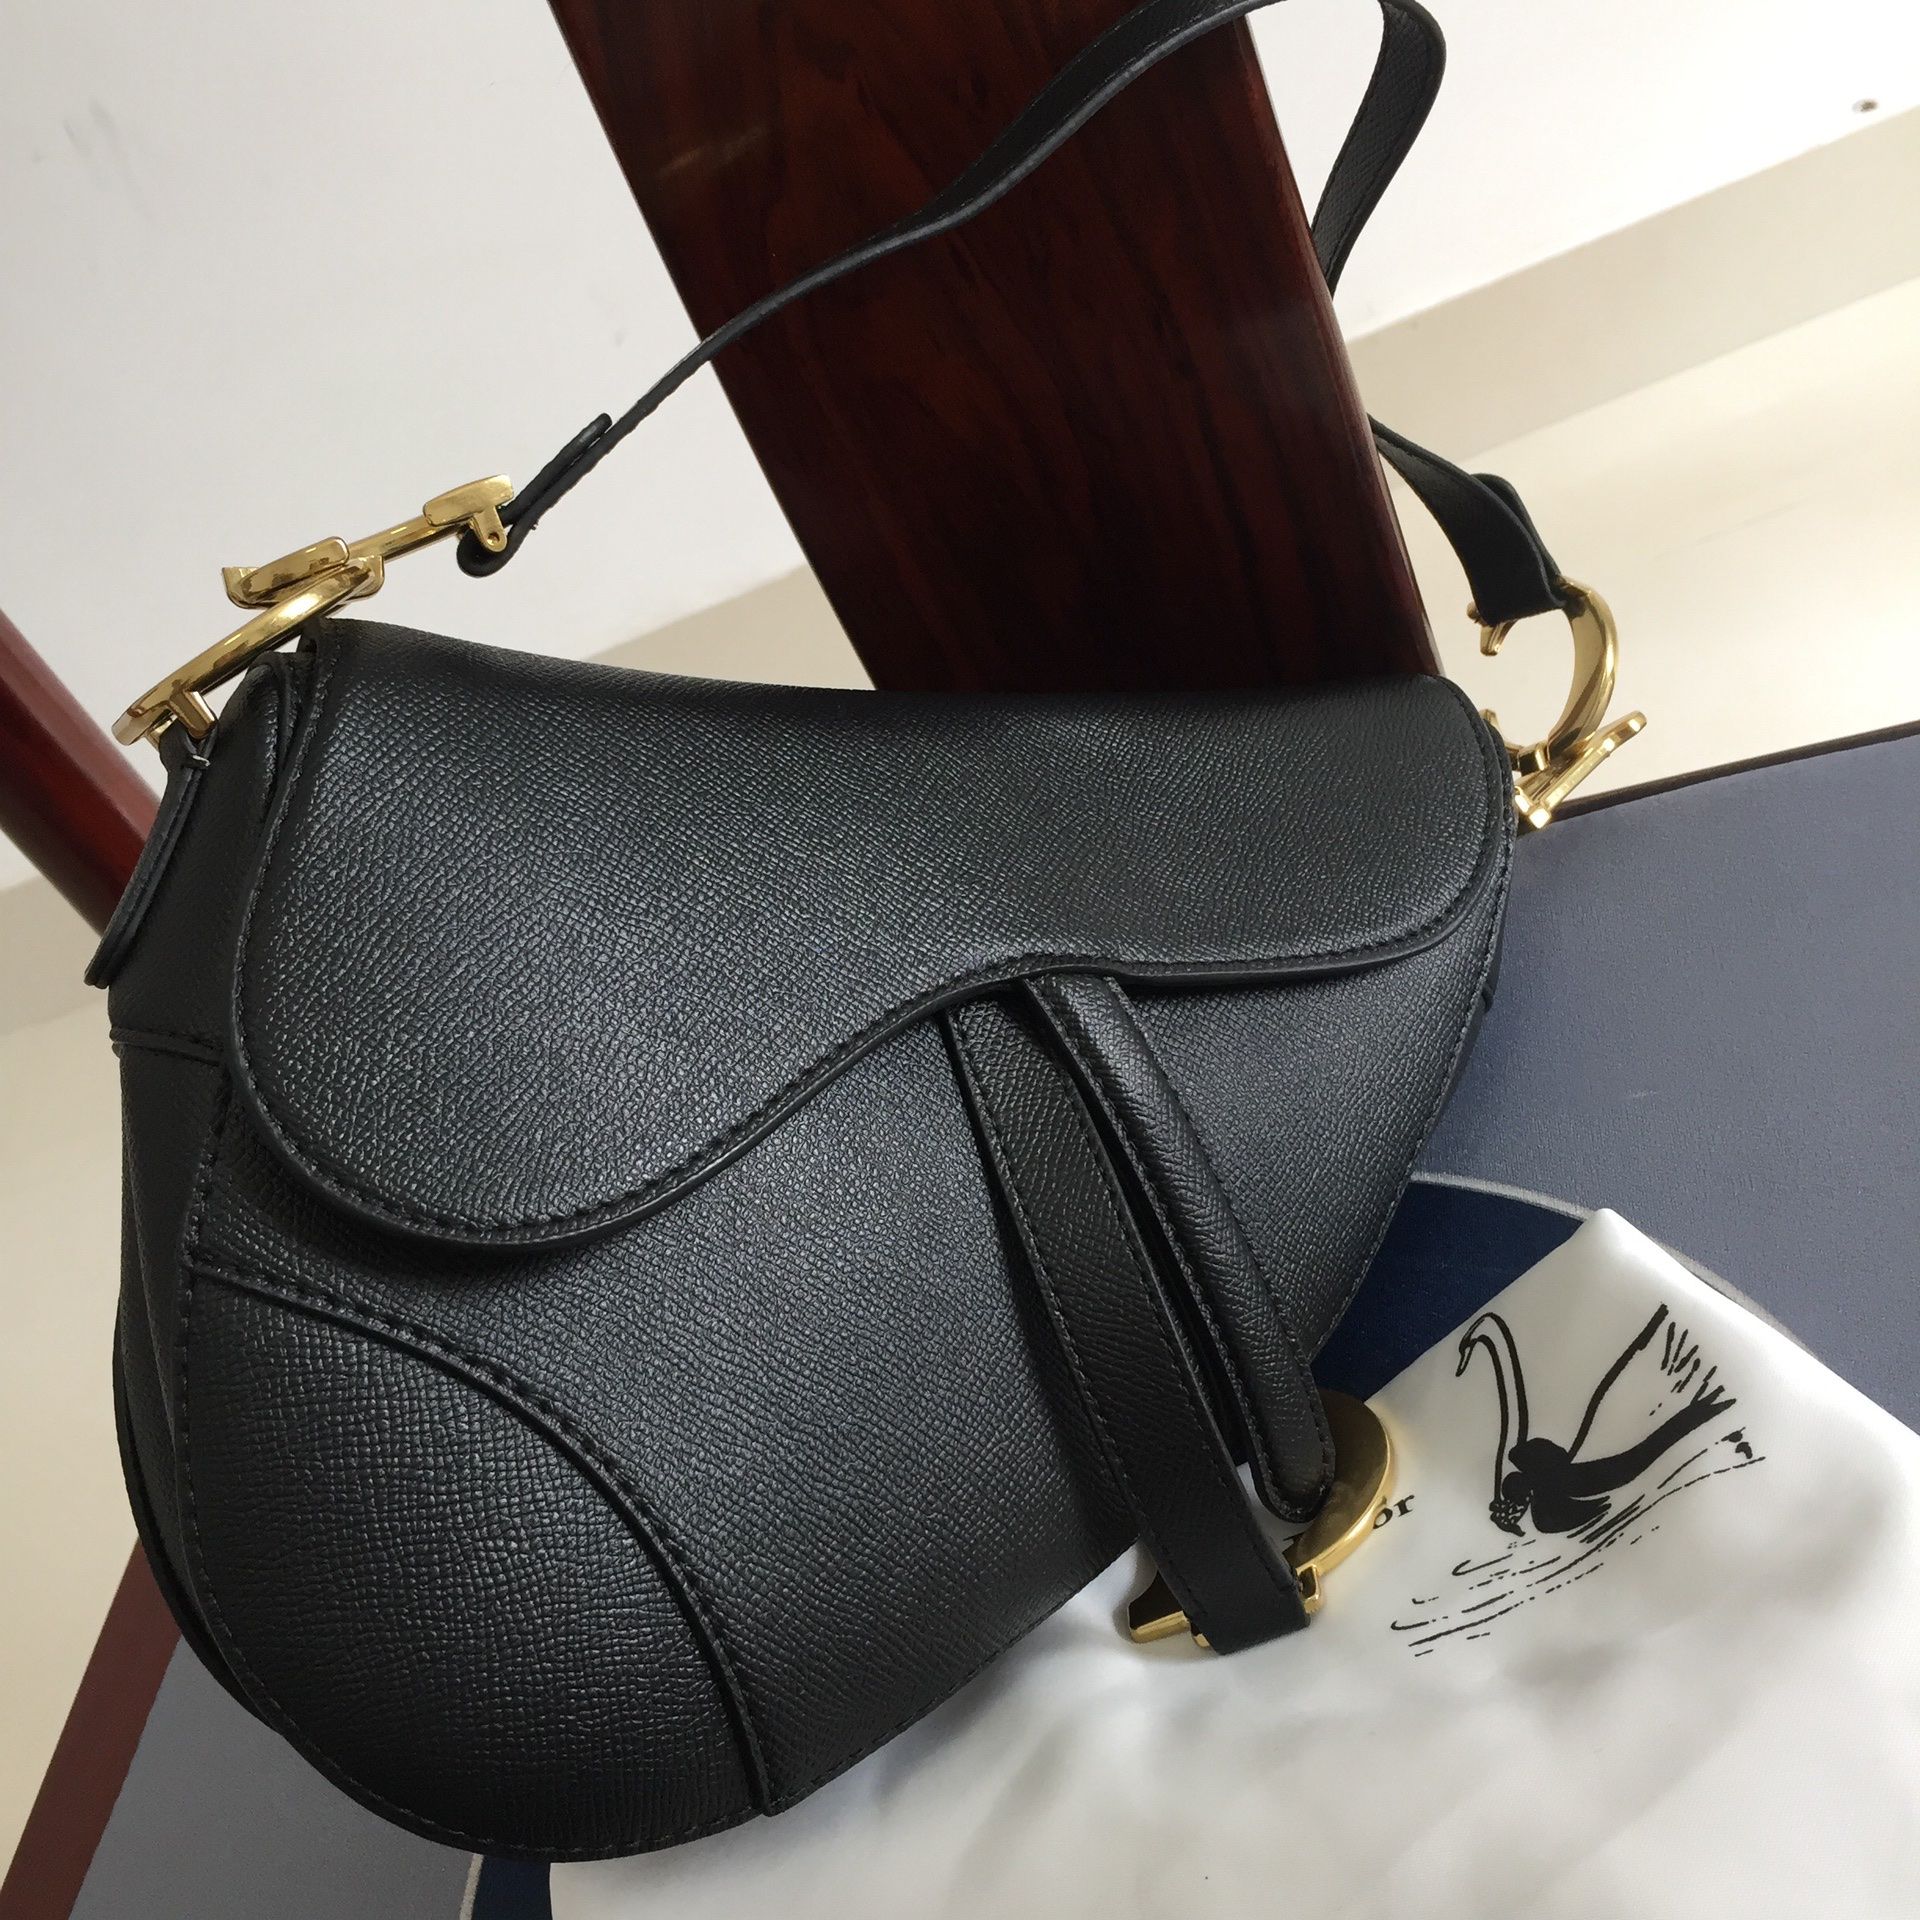 Dior Side Bag for Sale in Los Angeles, CA - OfferUp